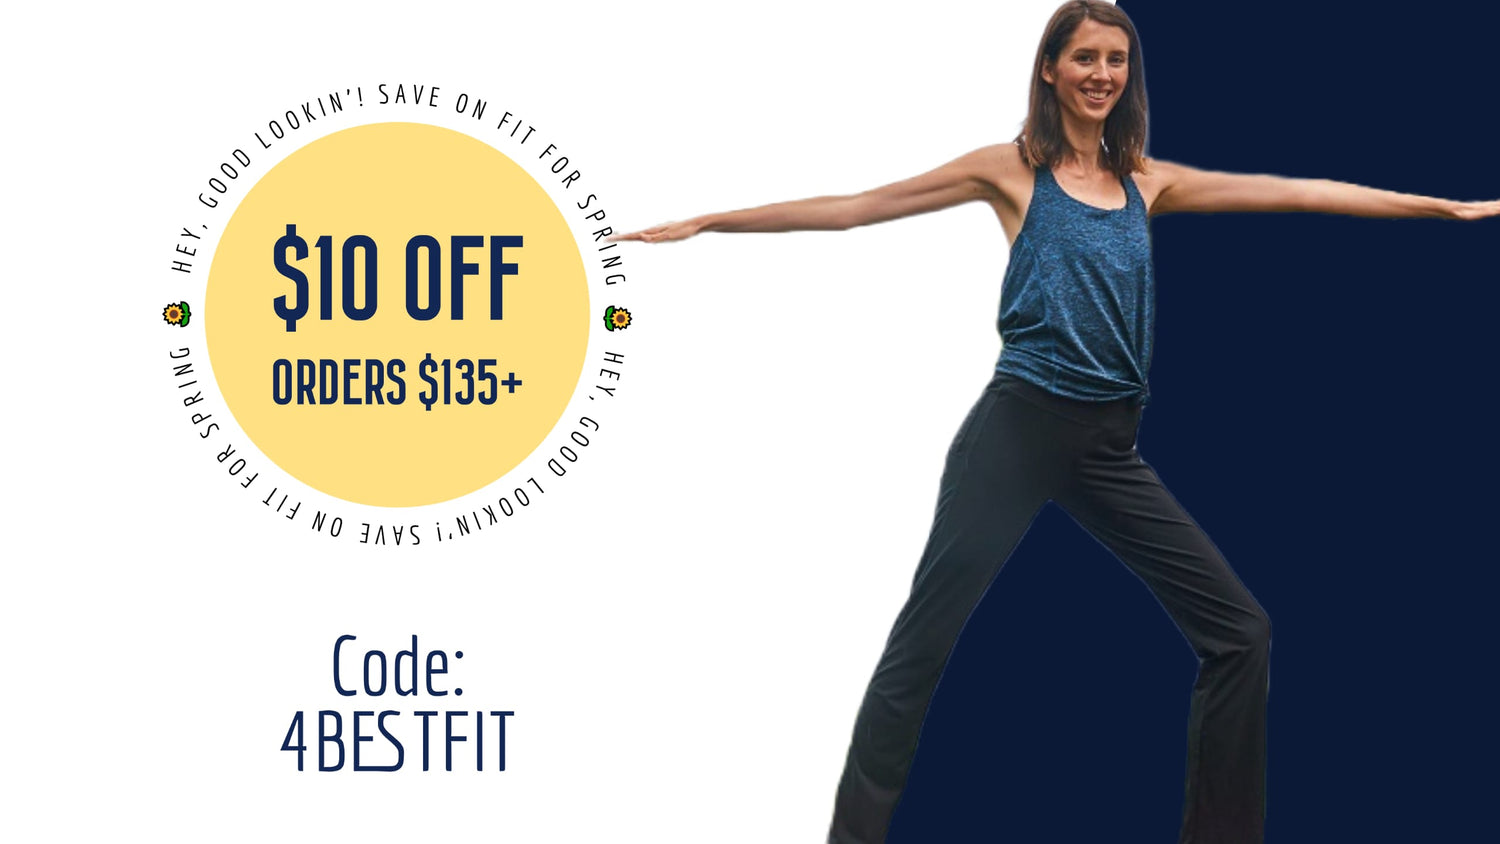 Petite and Tall Women's Athletic Pants. Talland Petite Women's Sweatpants.  Tall and Extra Tall Loungewear.  Tall and Petite Yoga Pants.  Find them all, ON SALE NOW at FORtheFIT.com